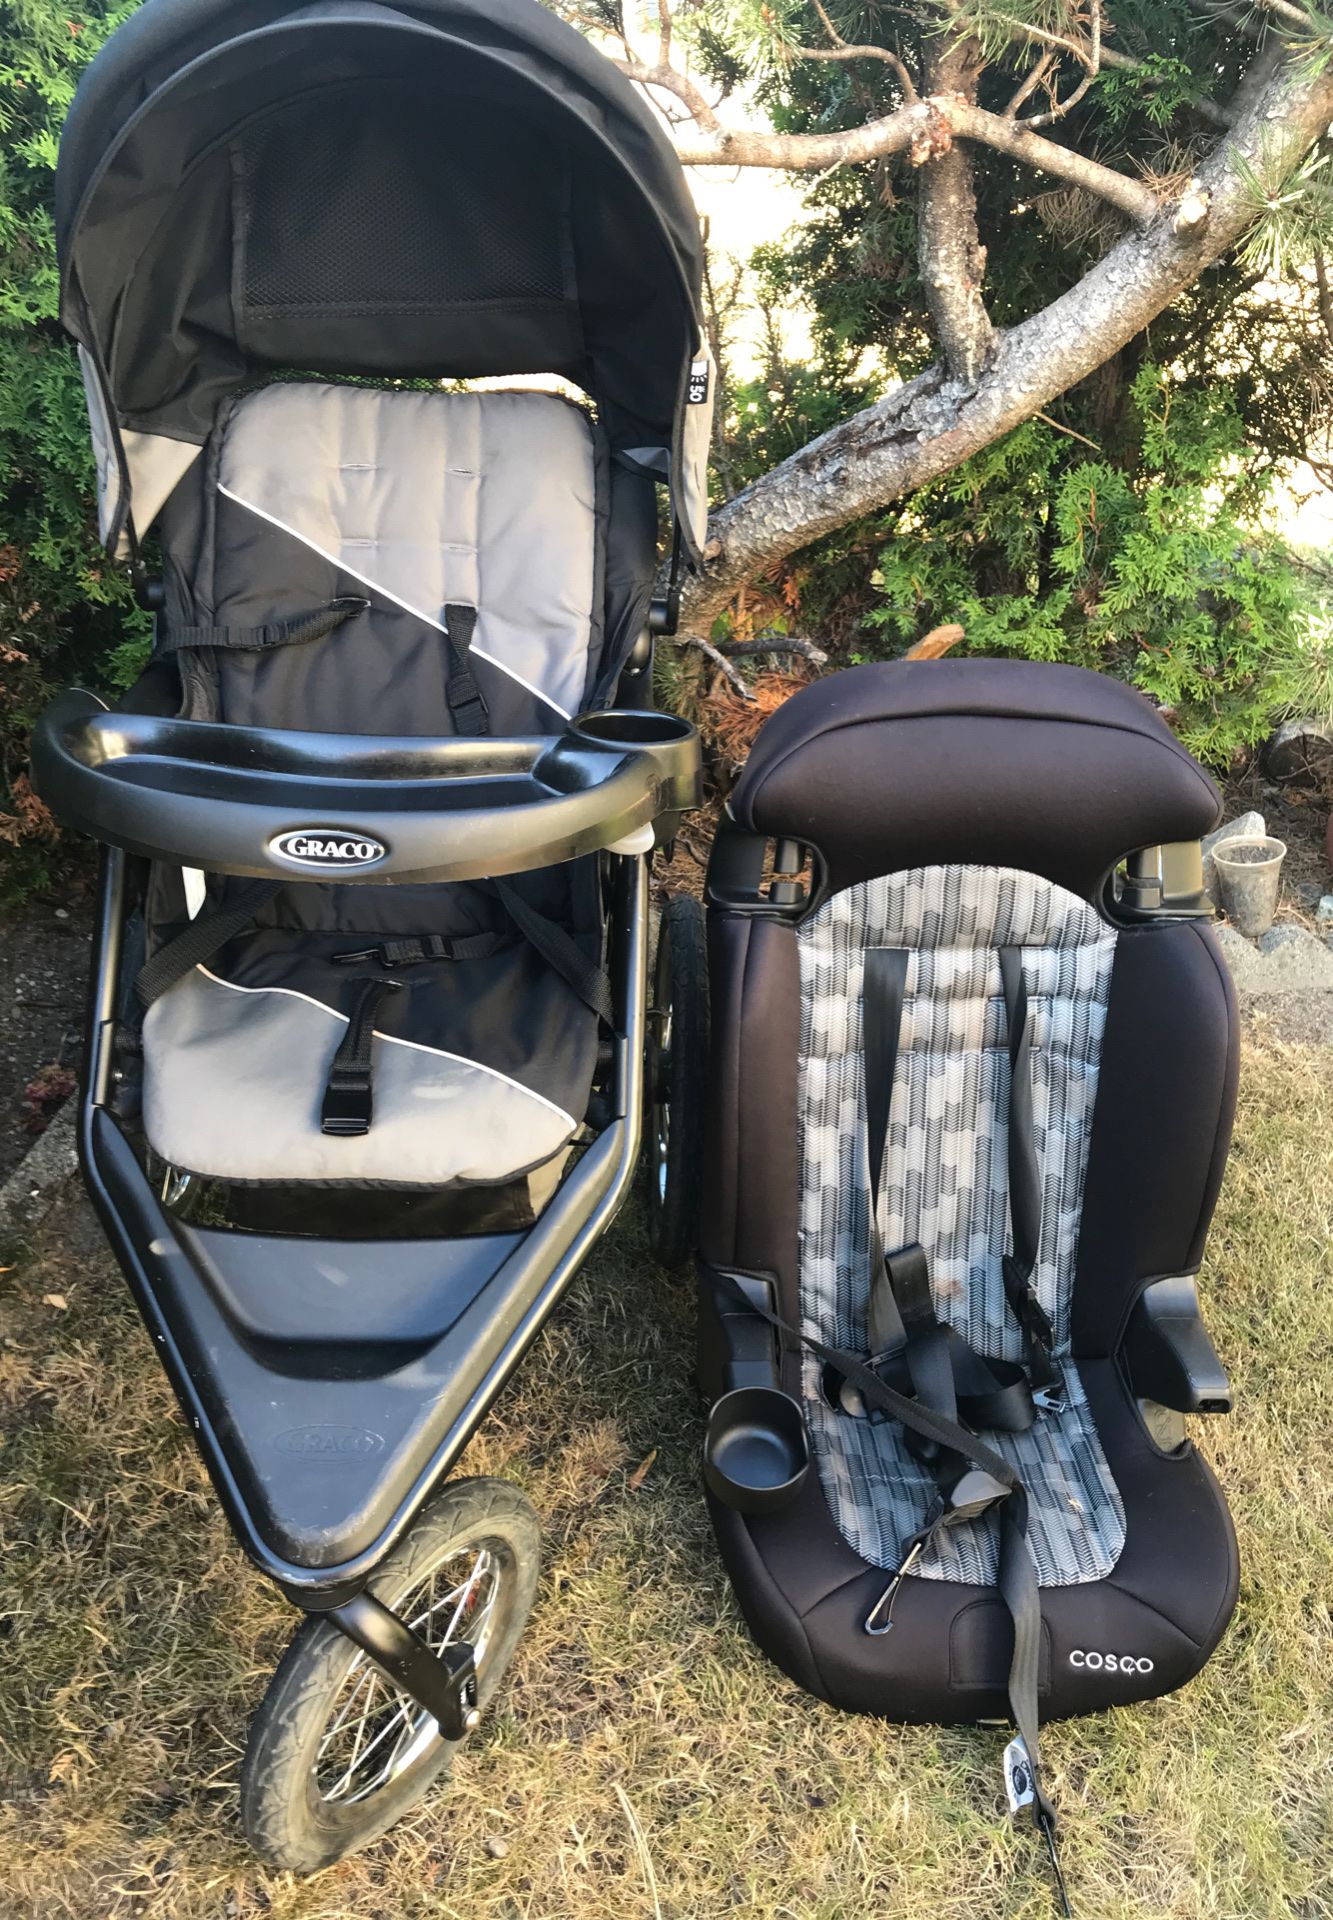 Crago baby stroller with car seat